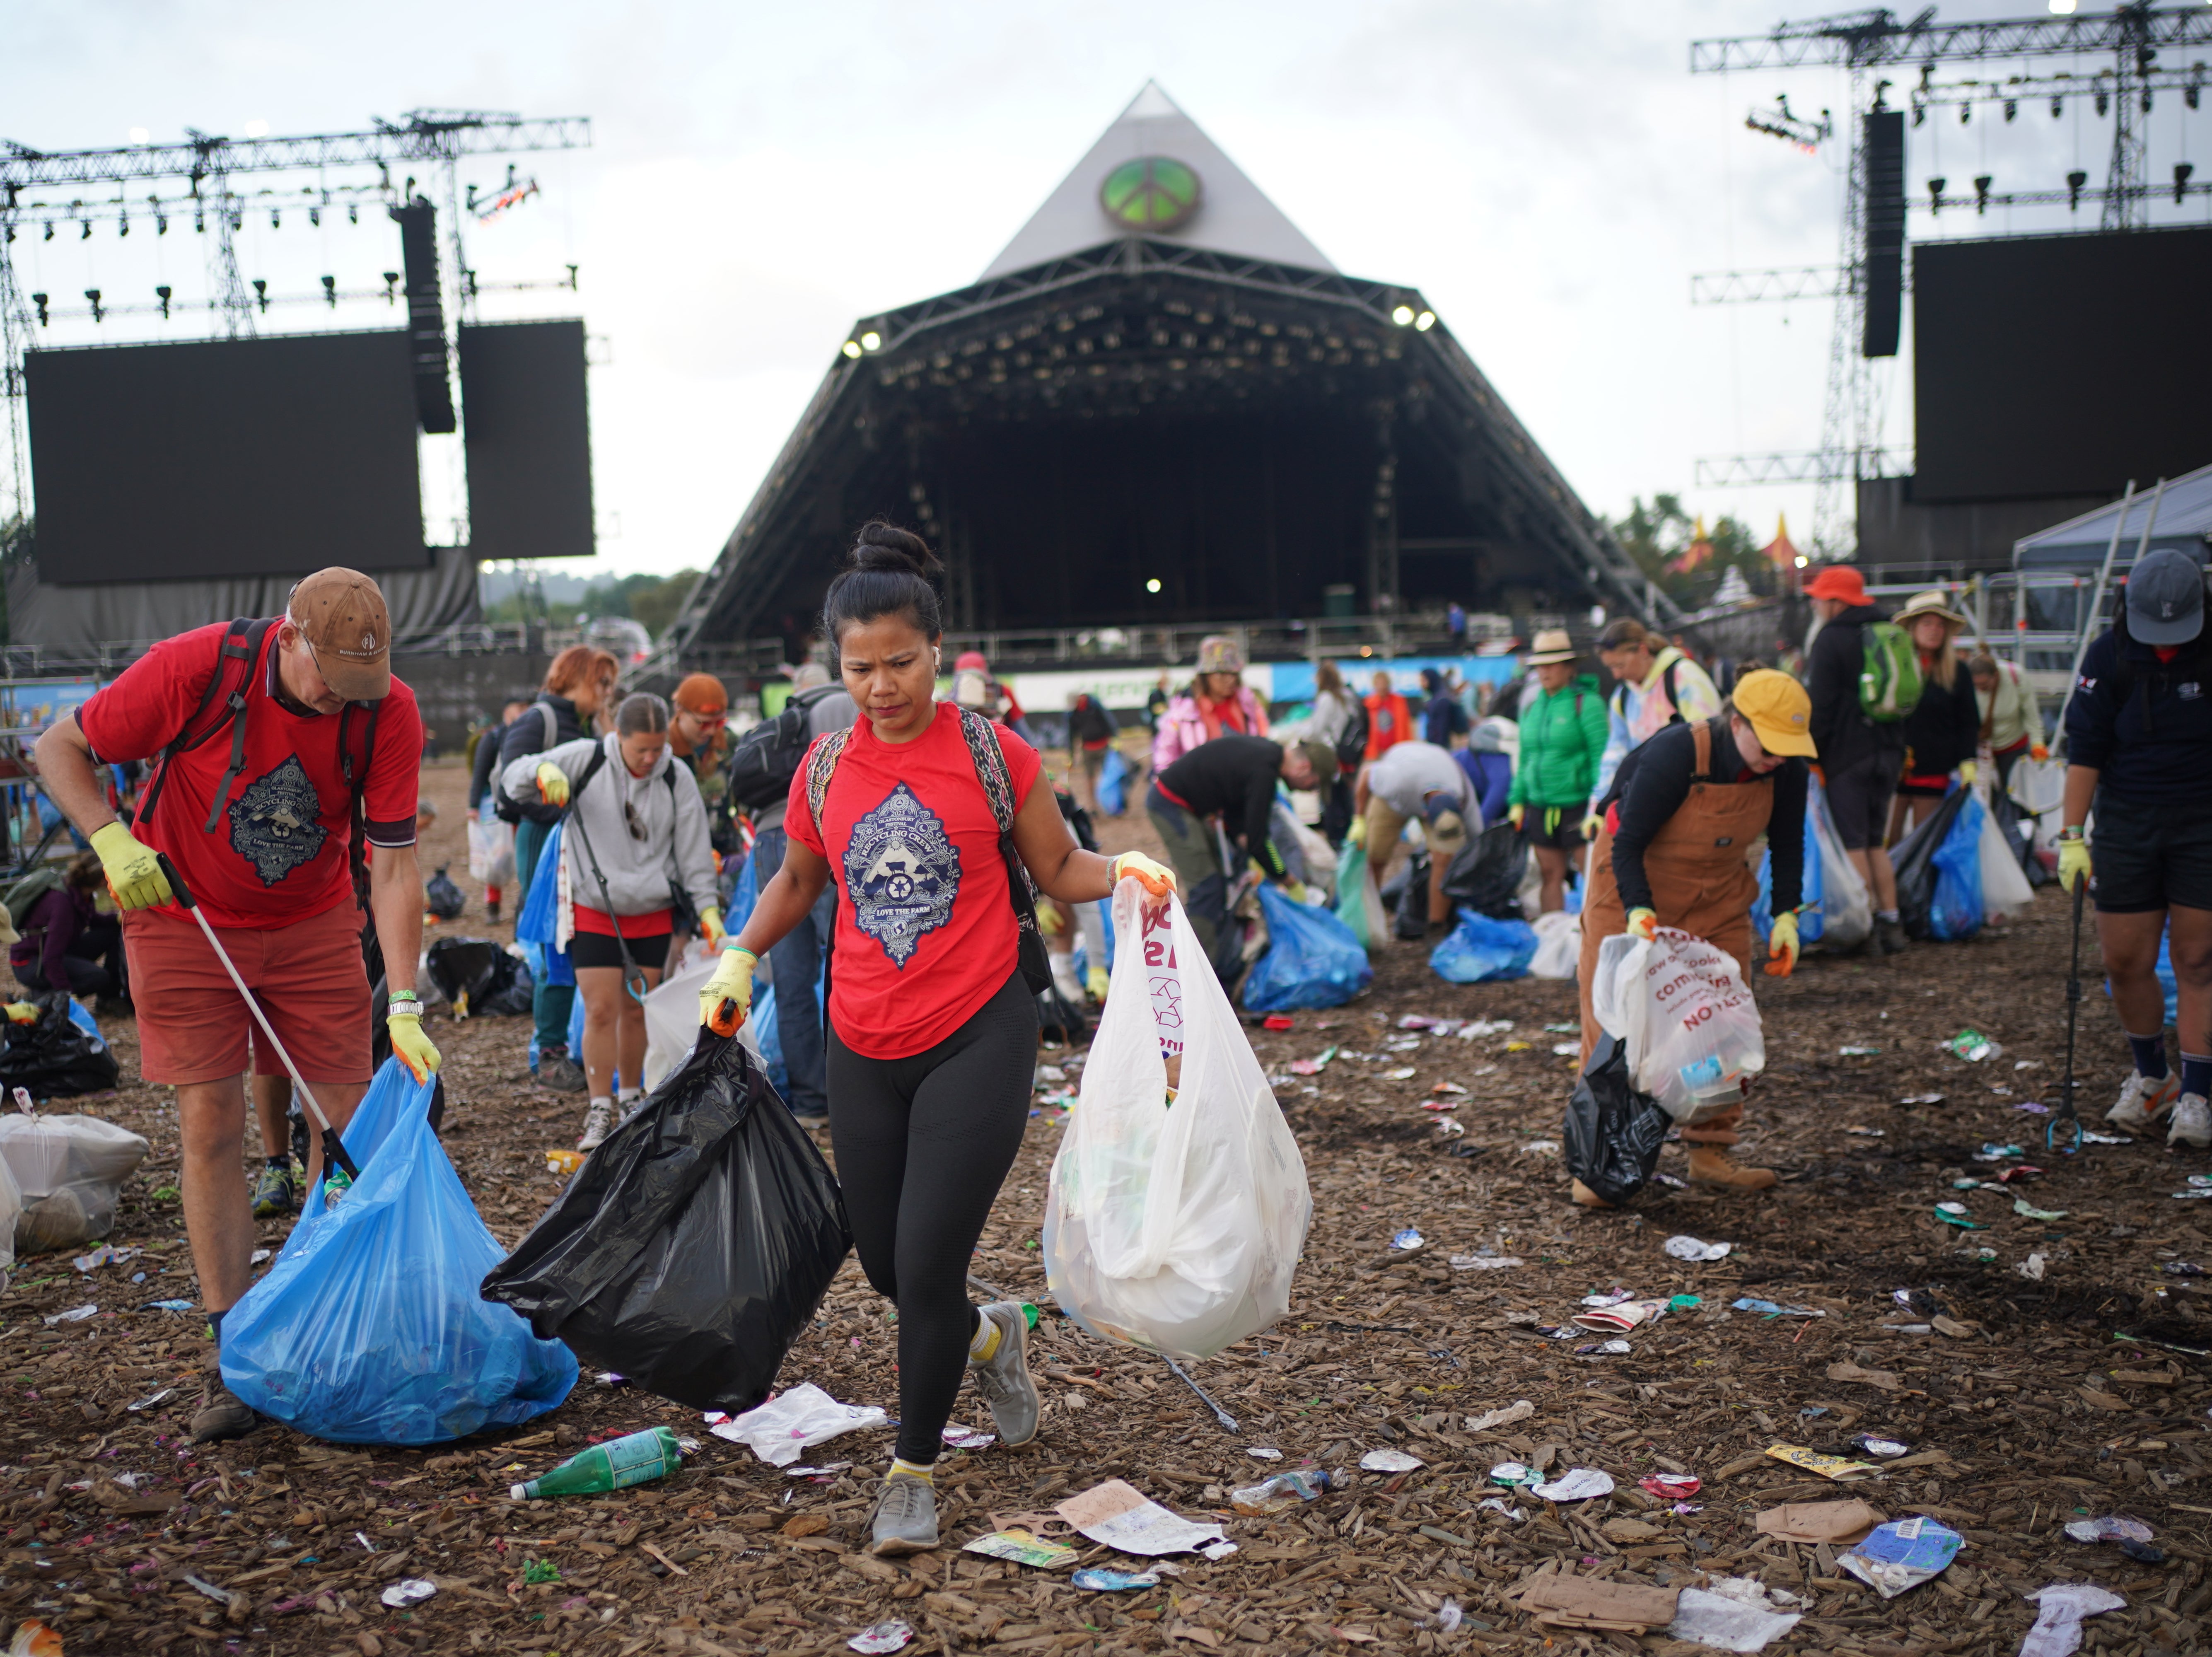 The Glastonbury 2023 site clean-up operation in progress